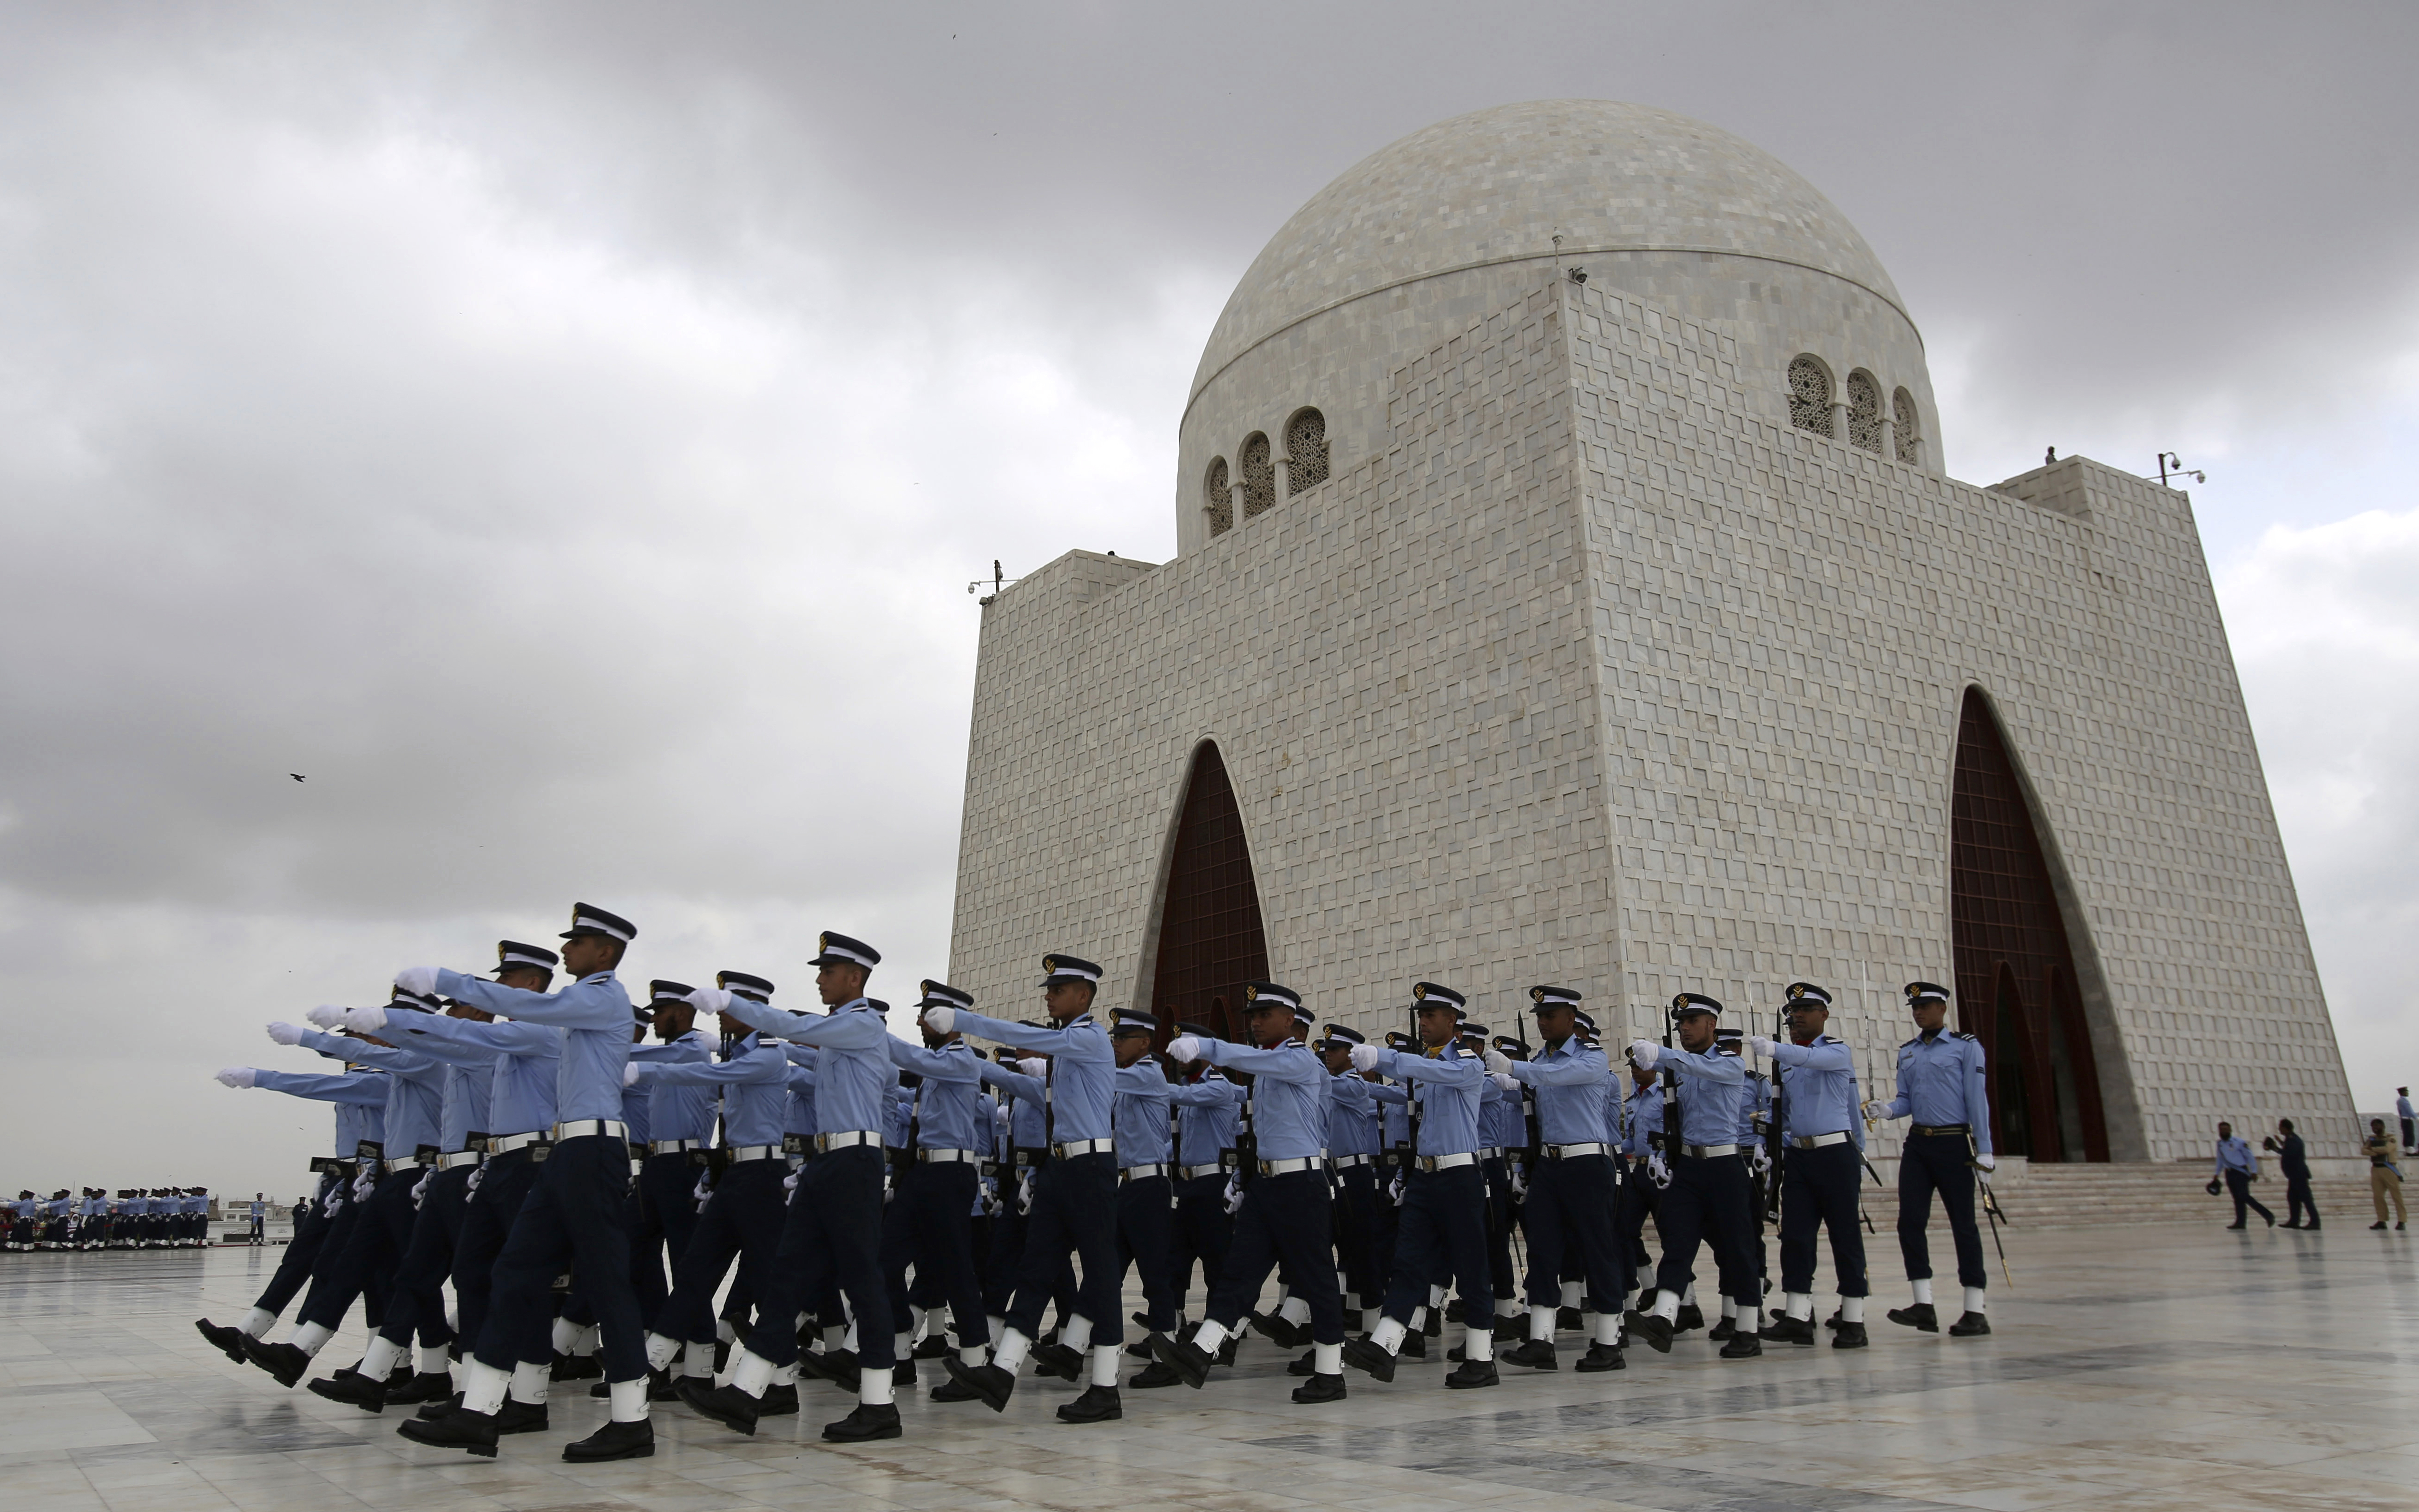 Pakistani Air Force personnel take part in a ceremony to mark Pakistan Defense Day at the Mausoleum of Mohammad Ali Jinnah, founder of Pakistan, in Karachi, Pakistan, Wednesday, Sept. 6, 2017. Pakistan celebrated its Defense Day marking the 1965 war with India over the disputed Kashmir region. (AP Photo/Fareed Khan)